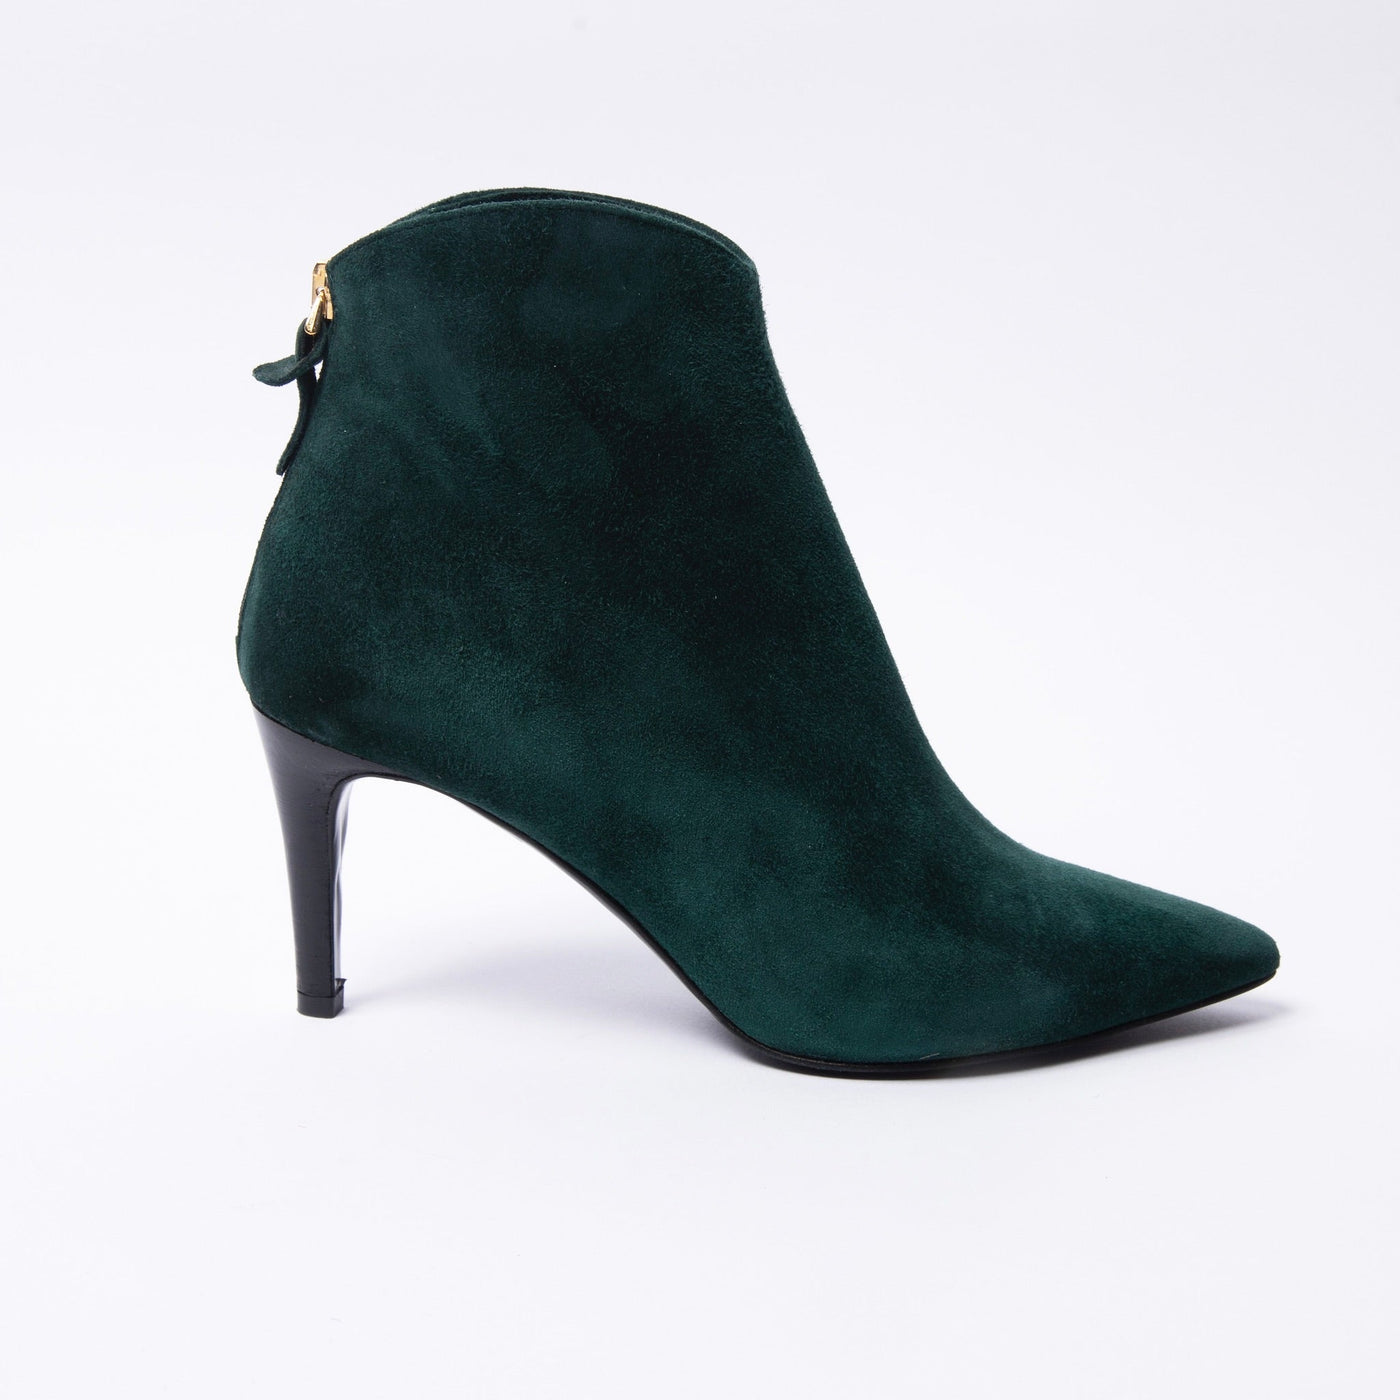 Ankle boots in dark green suede. Pointy toe and stiletto heel. 